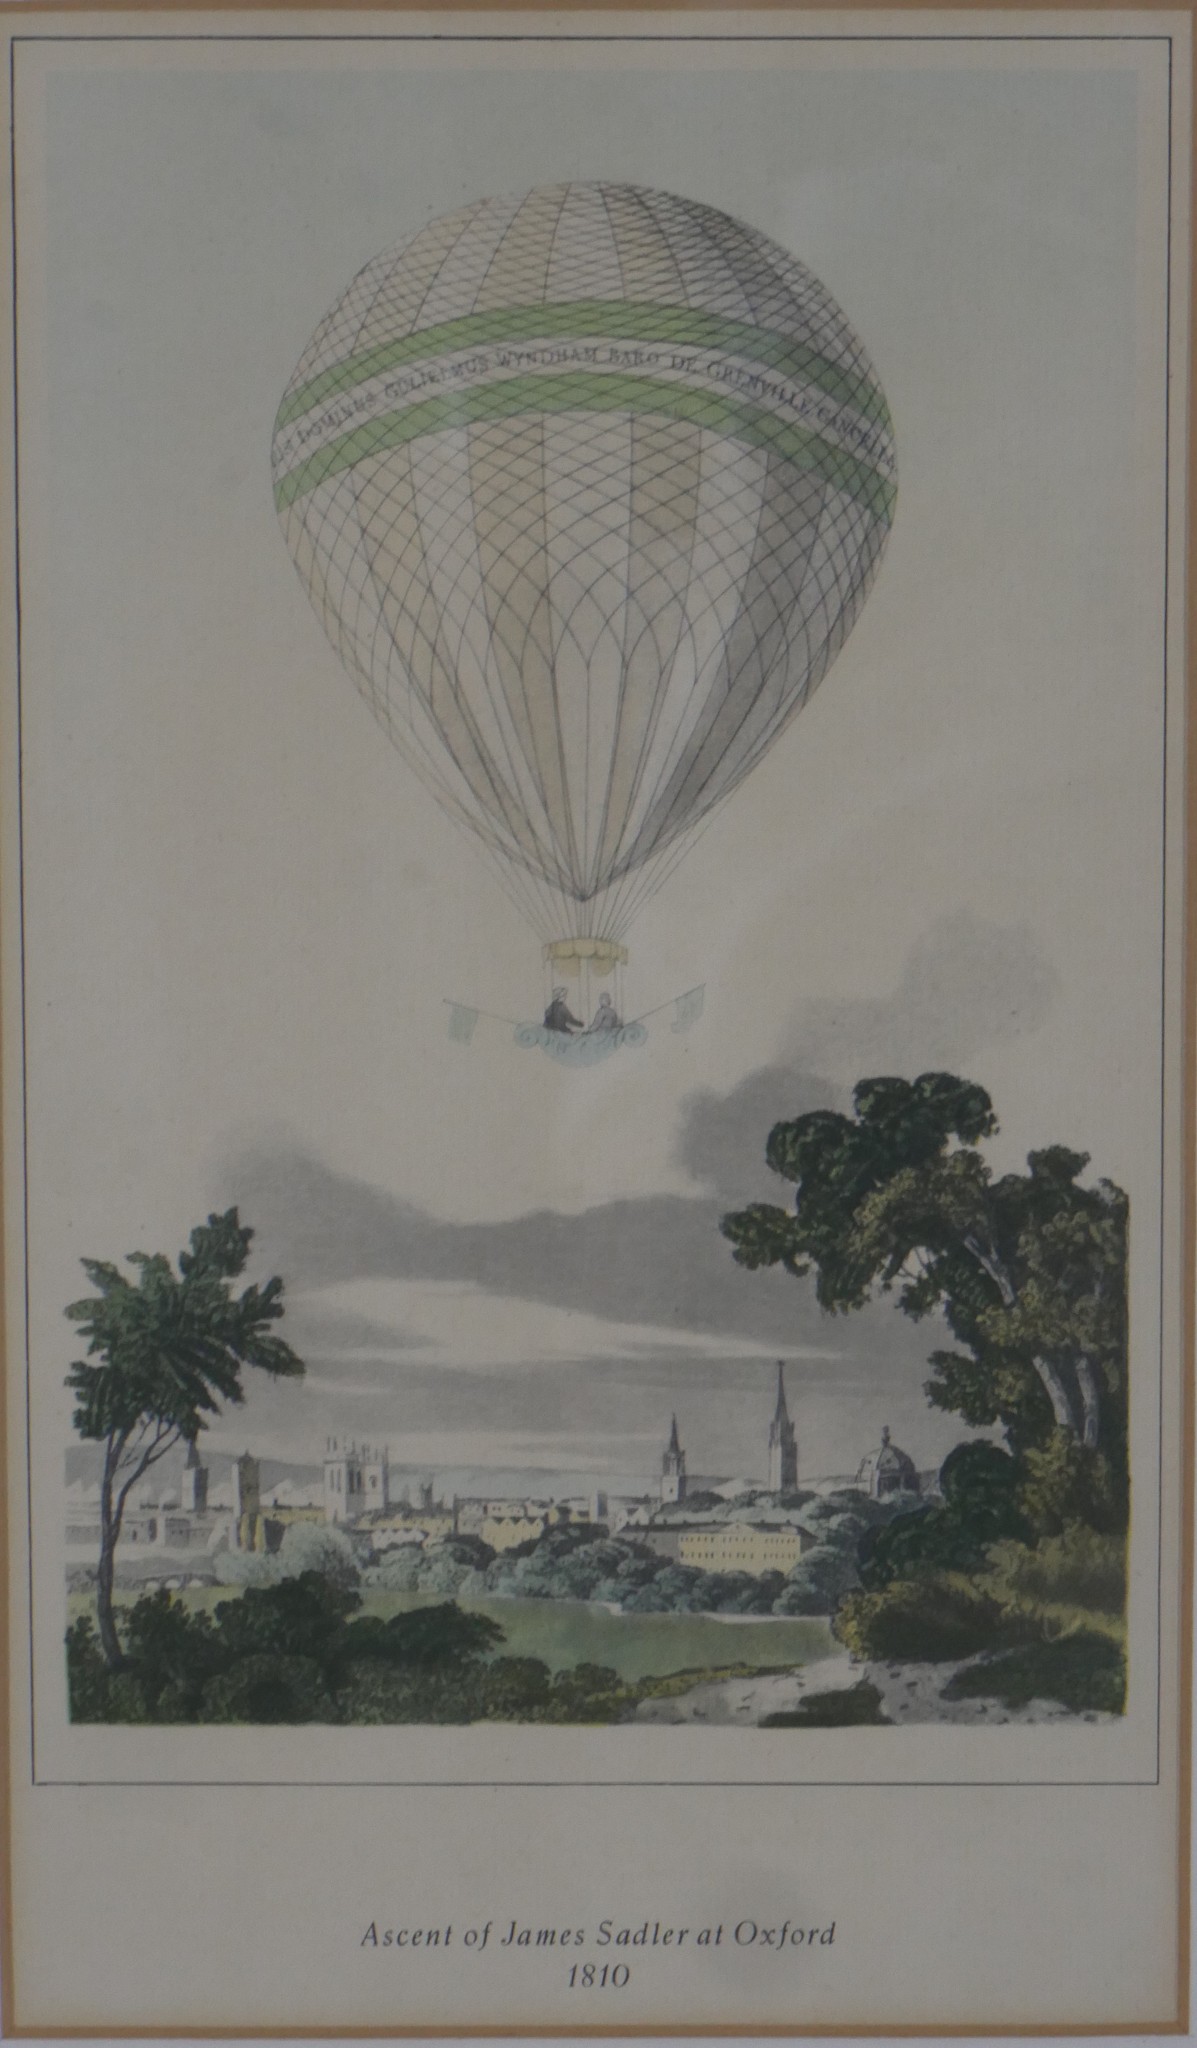 Ascent of James Sadler Two & Modele du Balloon two hot balloon related coloured prints, each - Image 4 of 6